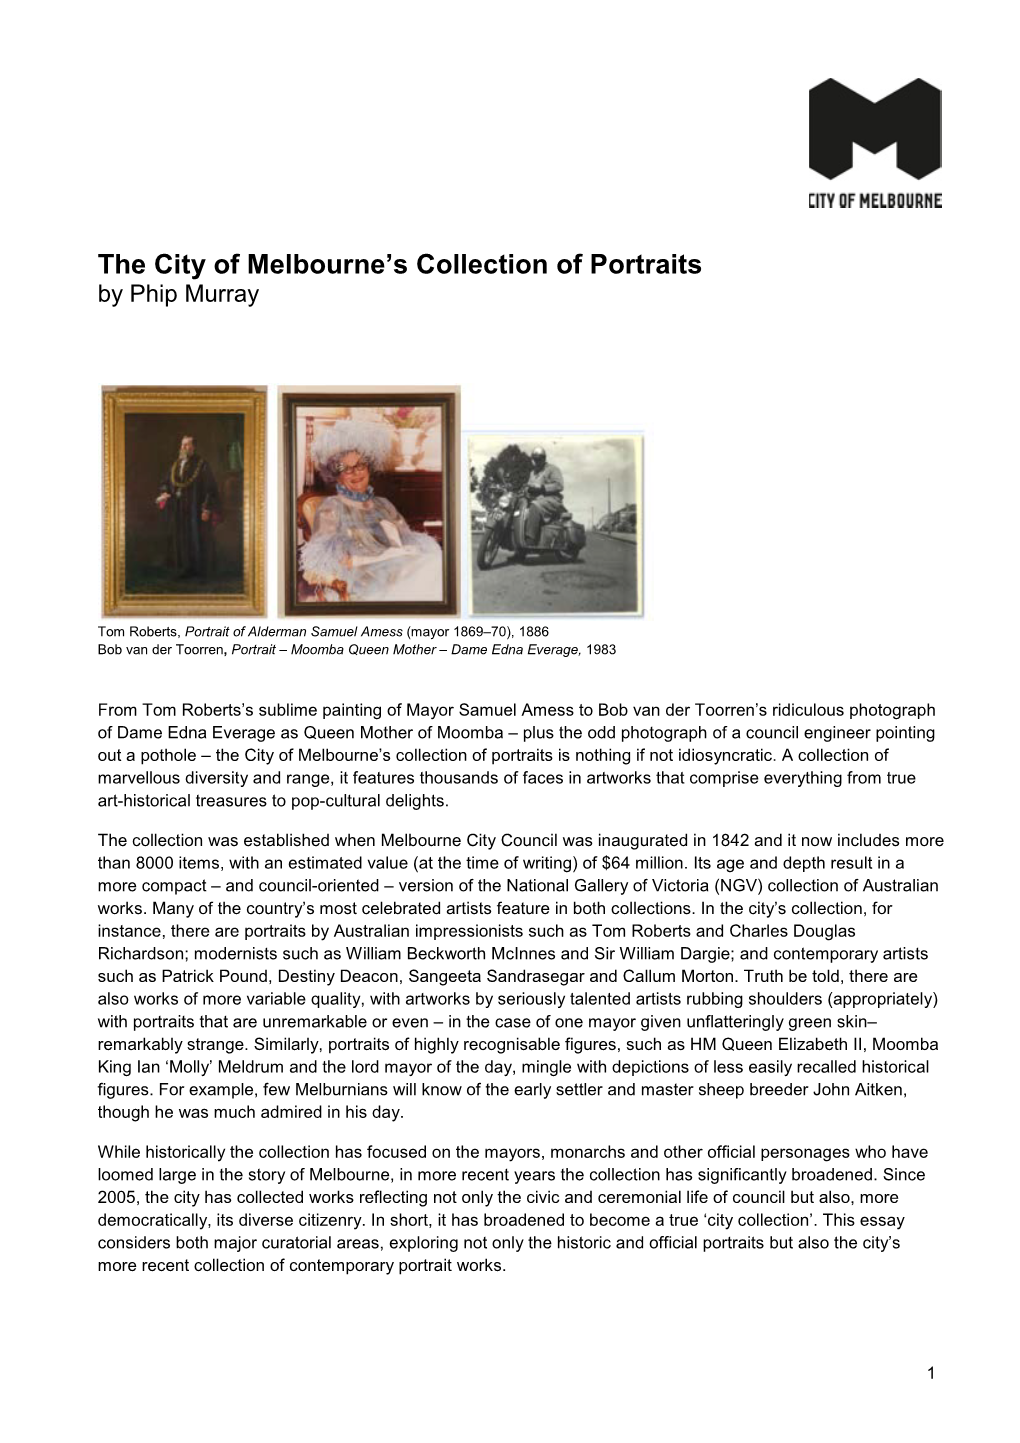 The City of Melbourne's Collection of Portraits